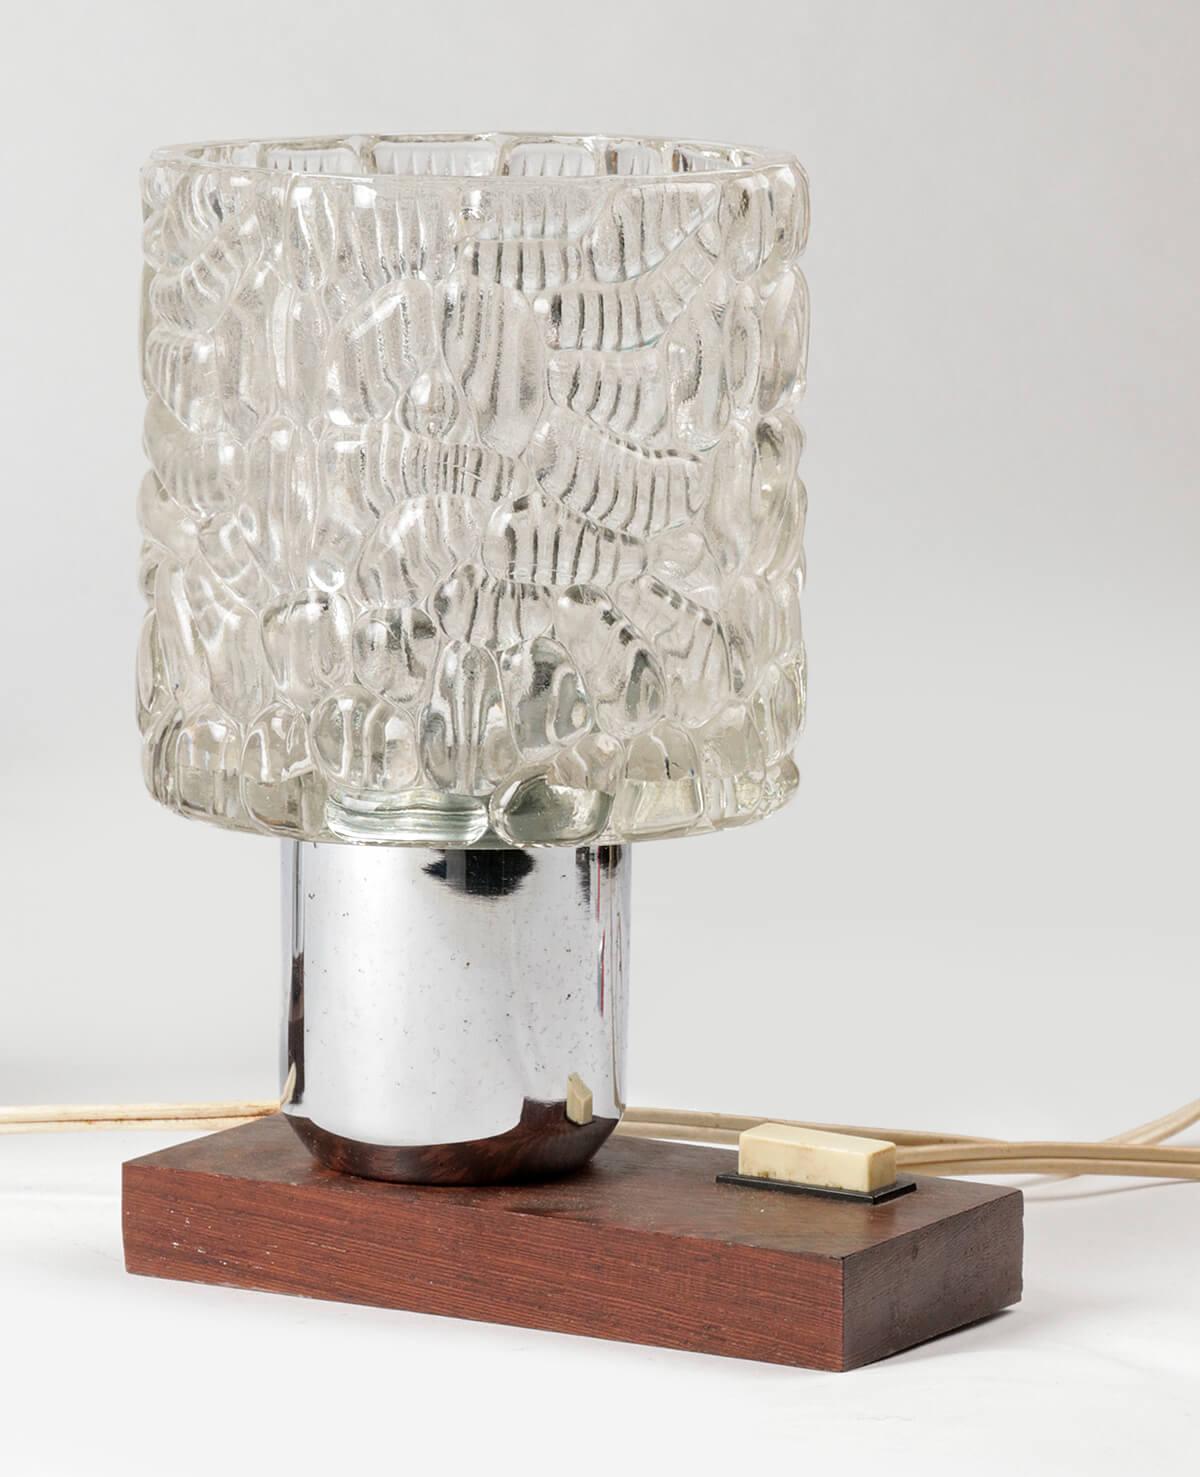 Hand-Crafted Pair of Mid-20th Century Modern Design Table Lamps